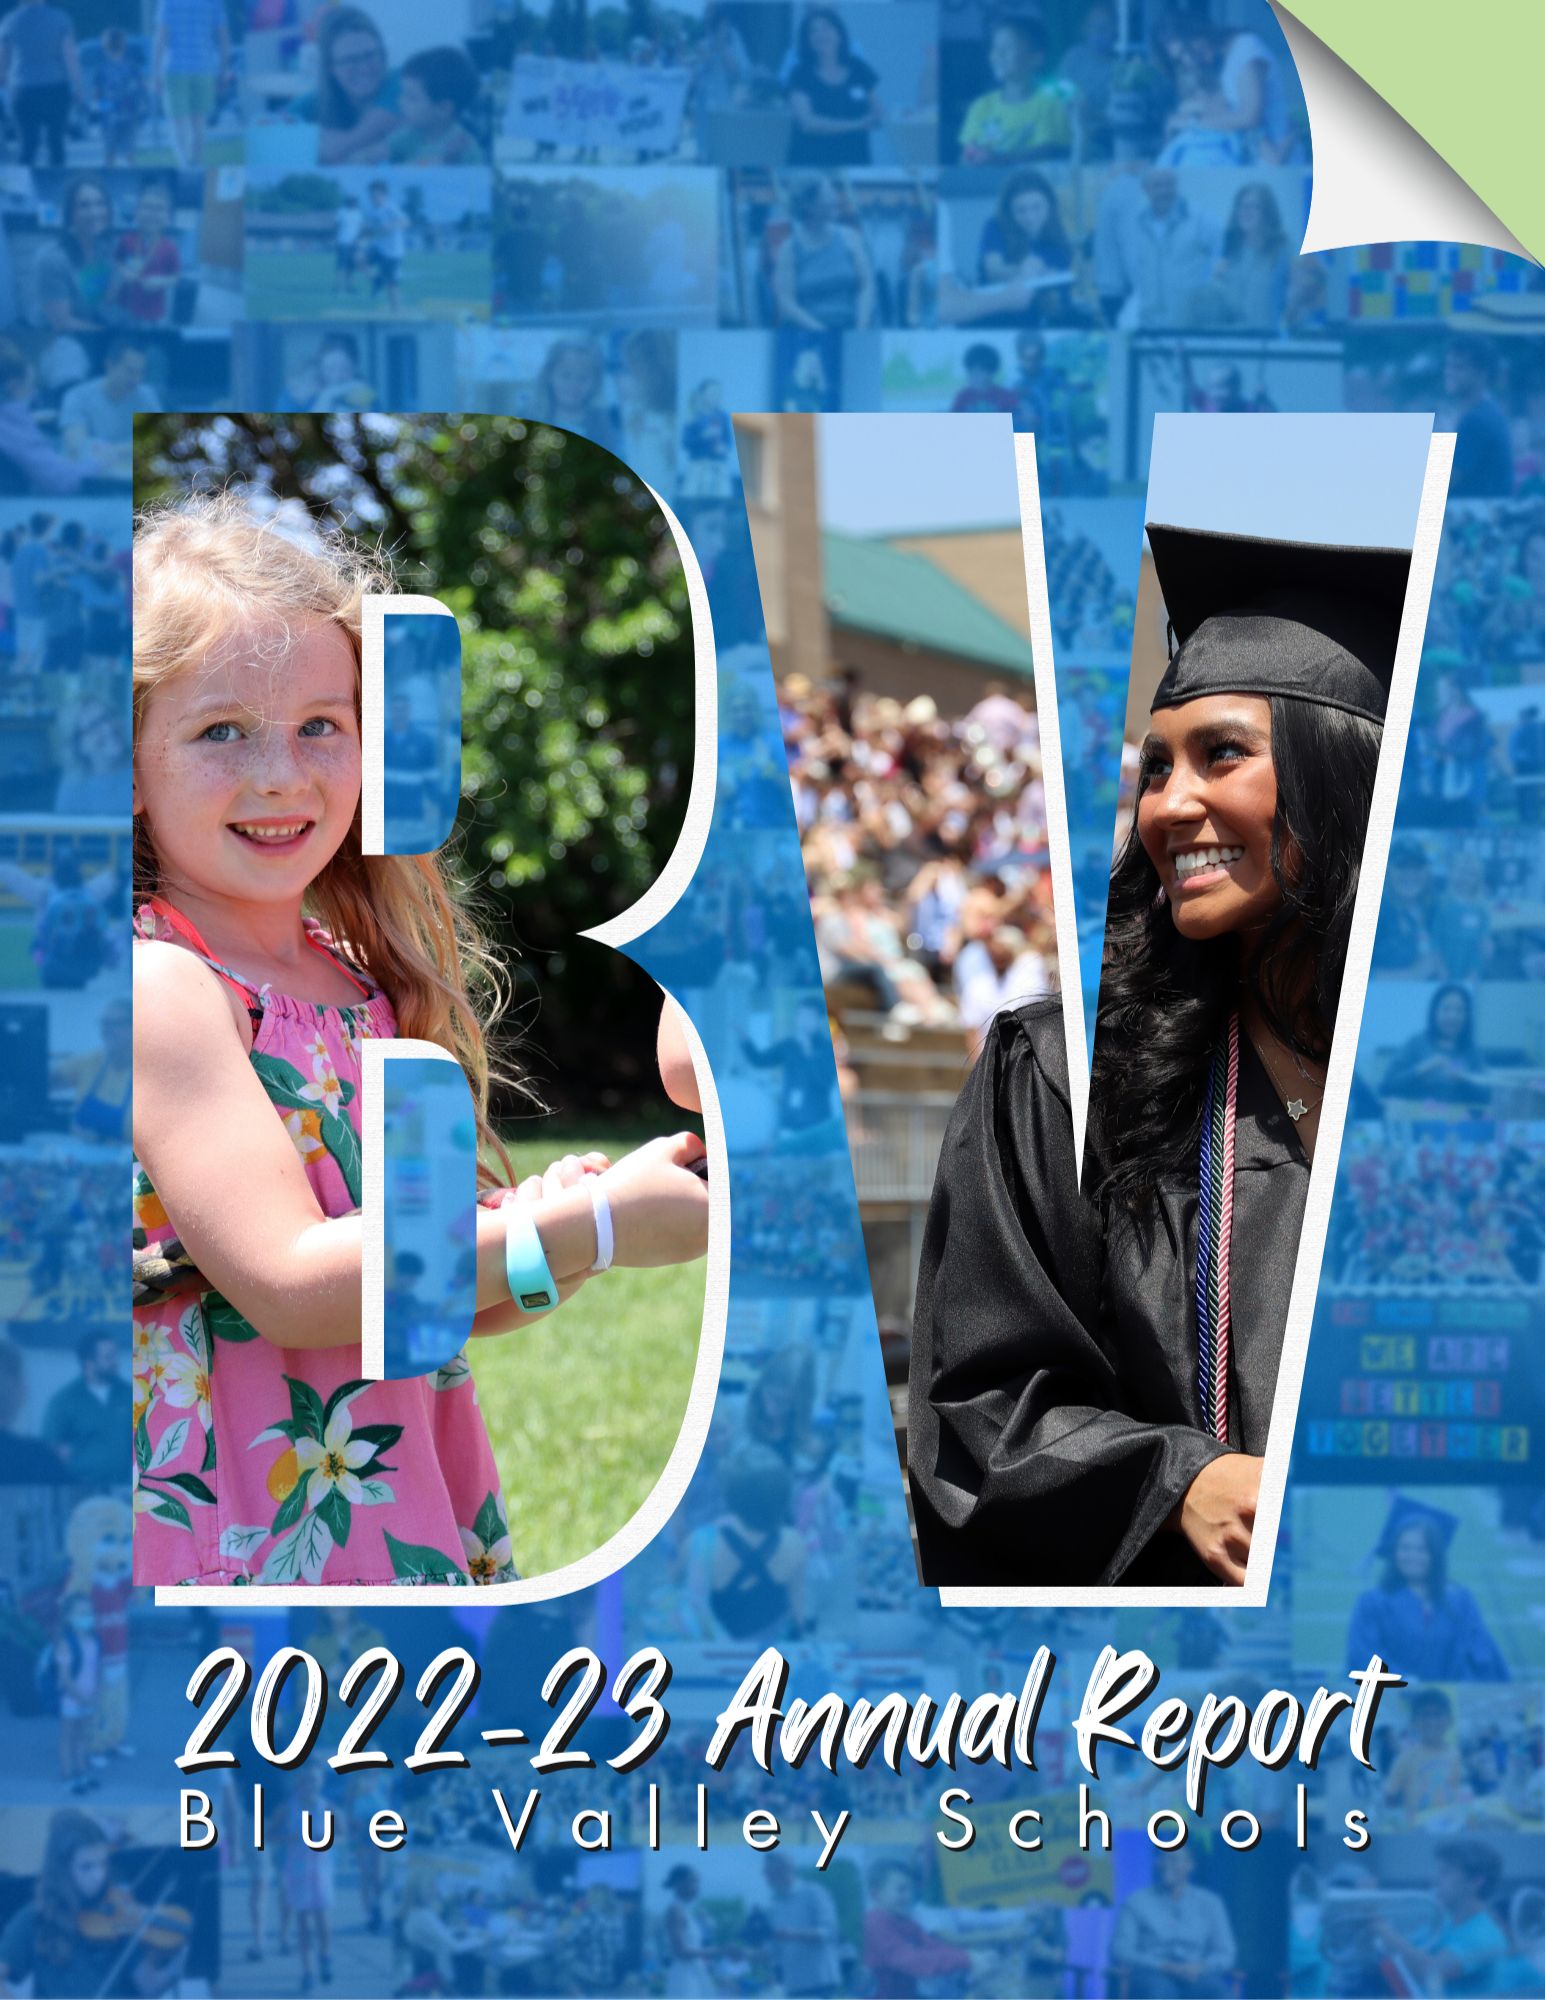 BV Schools Annual report cover of an elementary student and a high school graduate